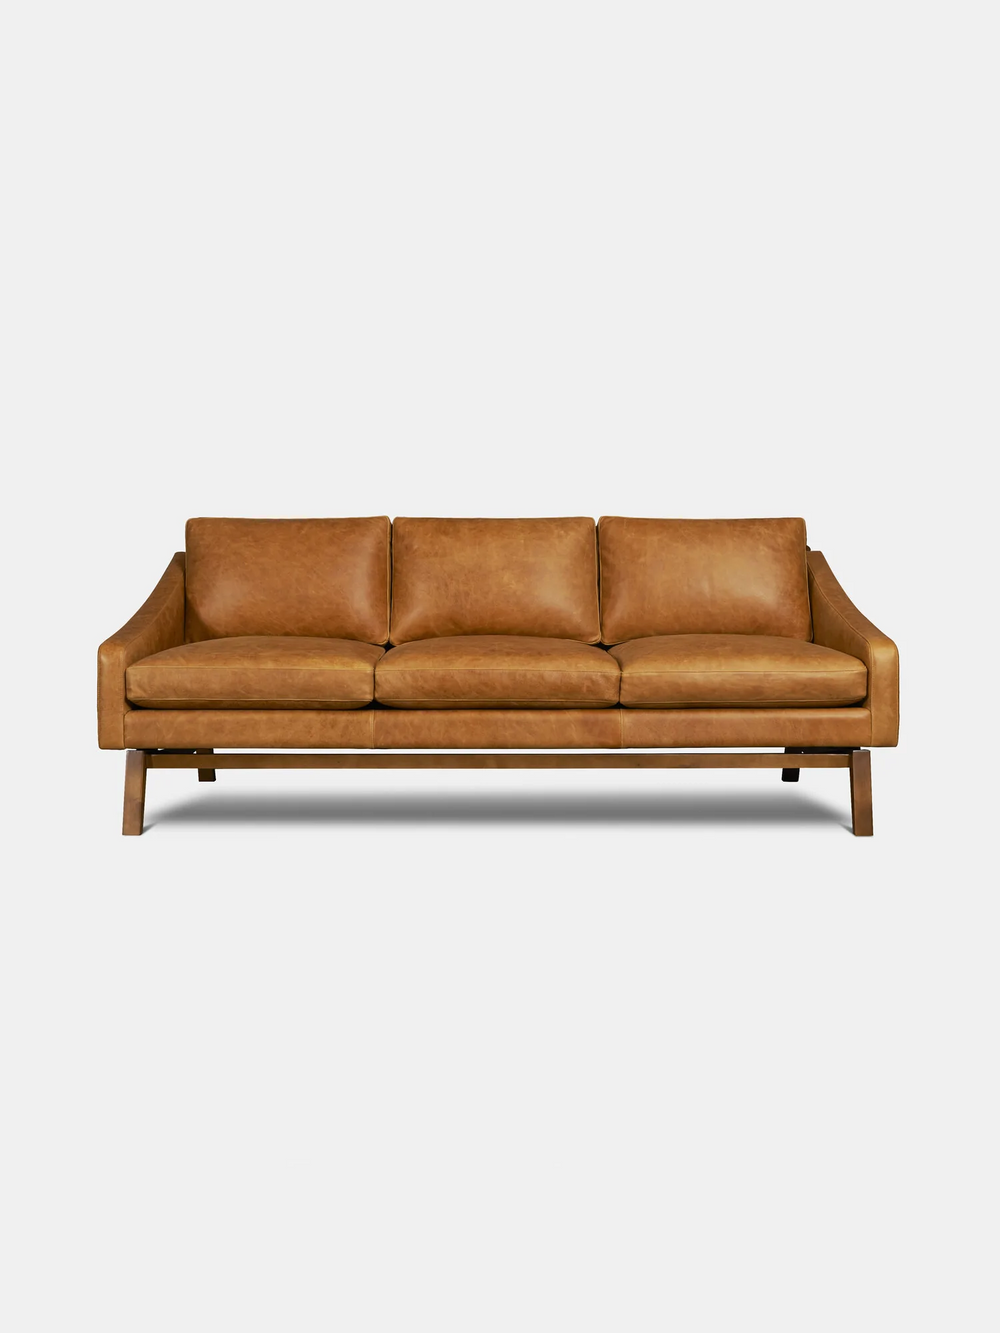 One for Victory - Dutch - Sofa